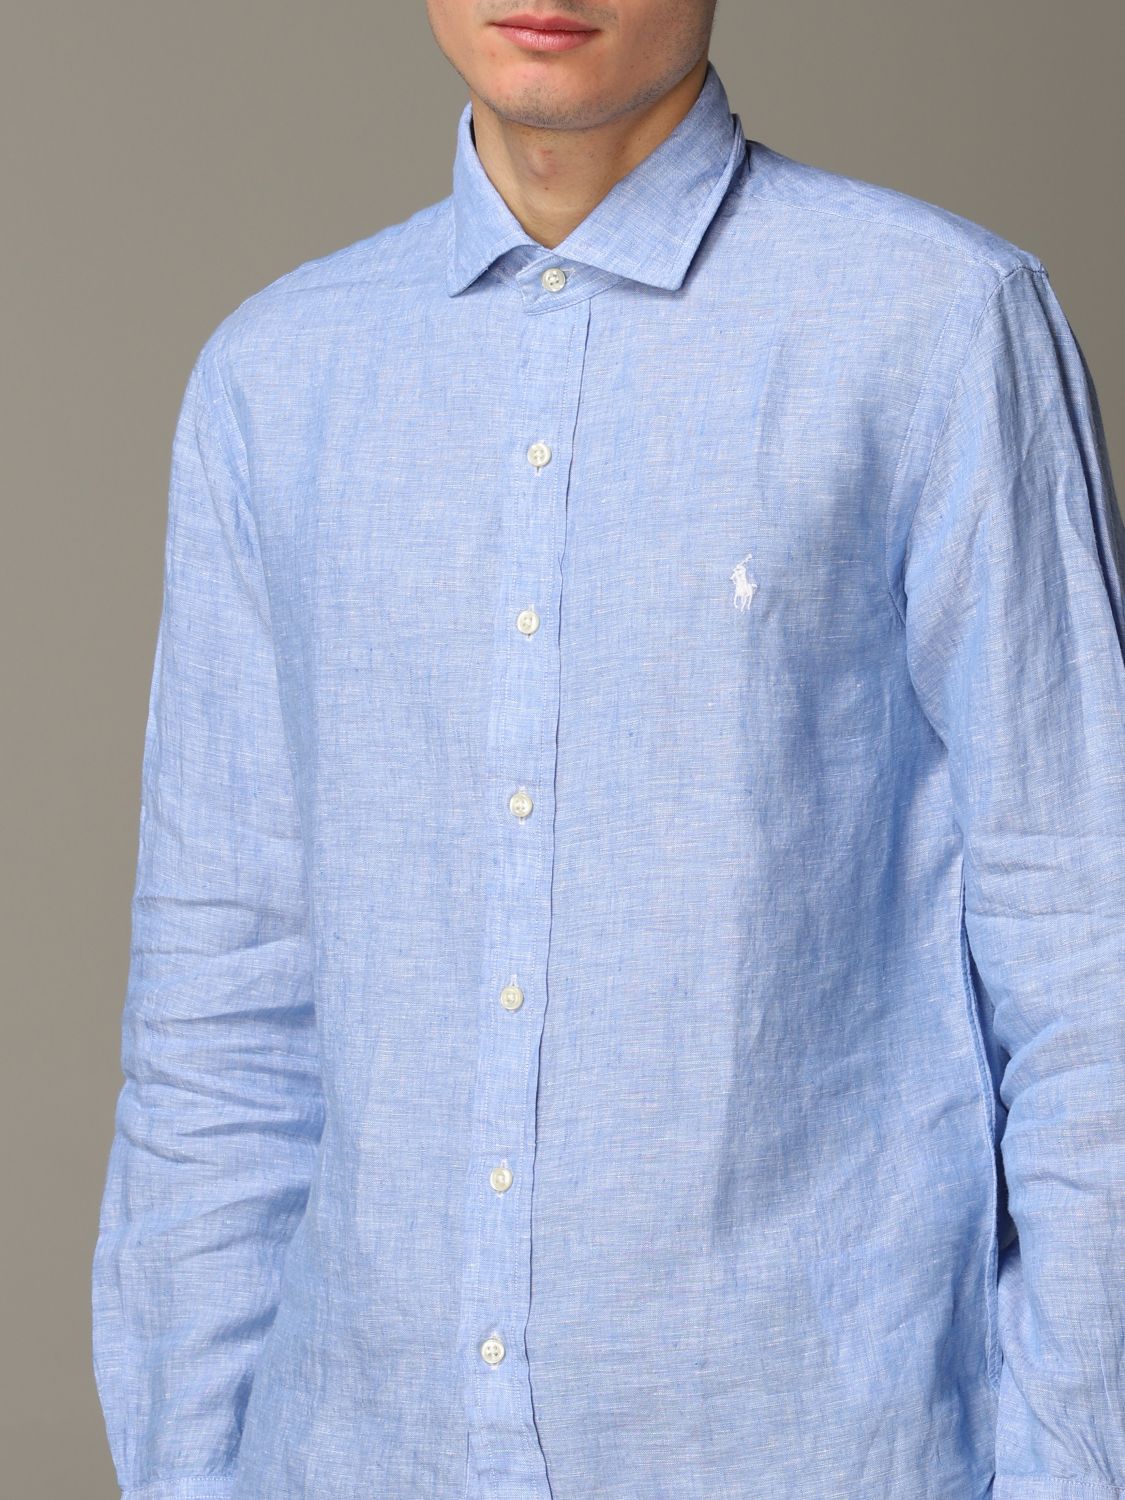 Shirt Polo Ralph Lauren: Polo Ralph Lauren shirt for man gnawed blue 5